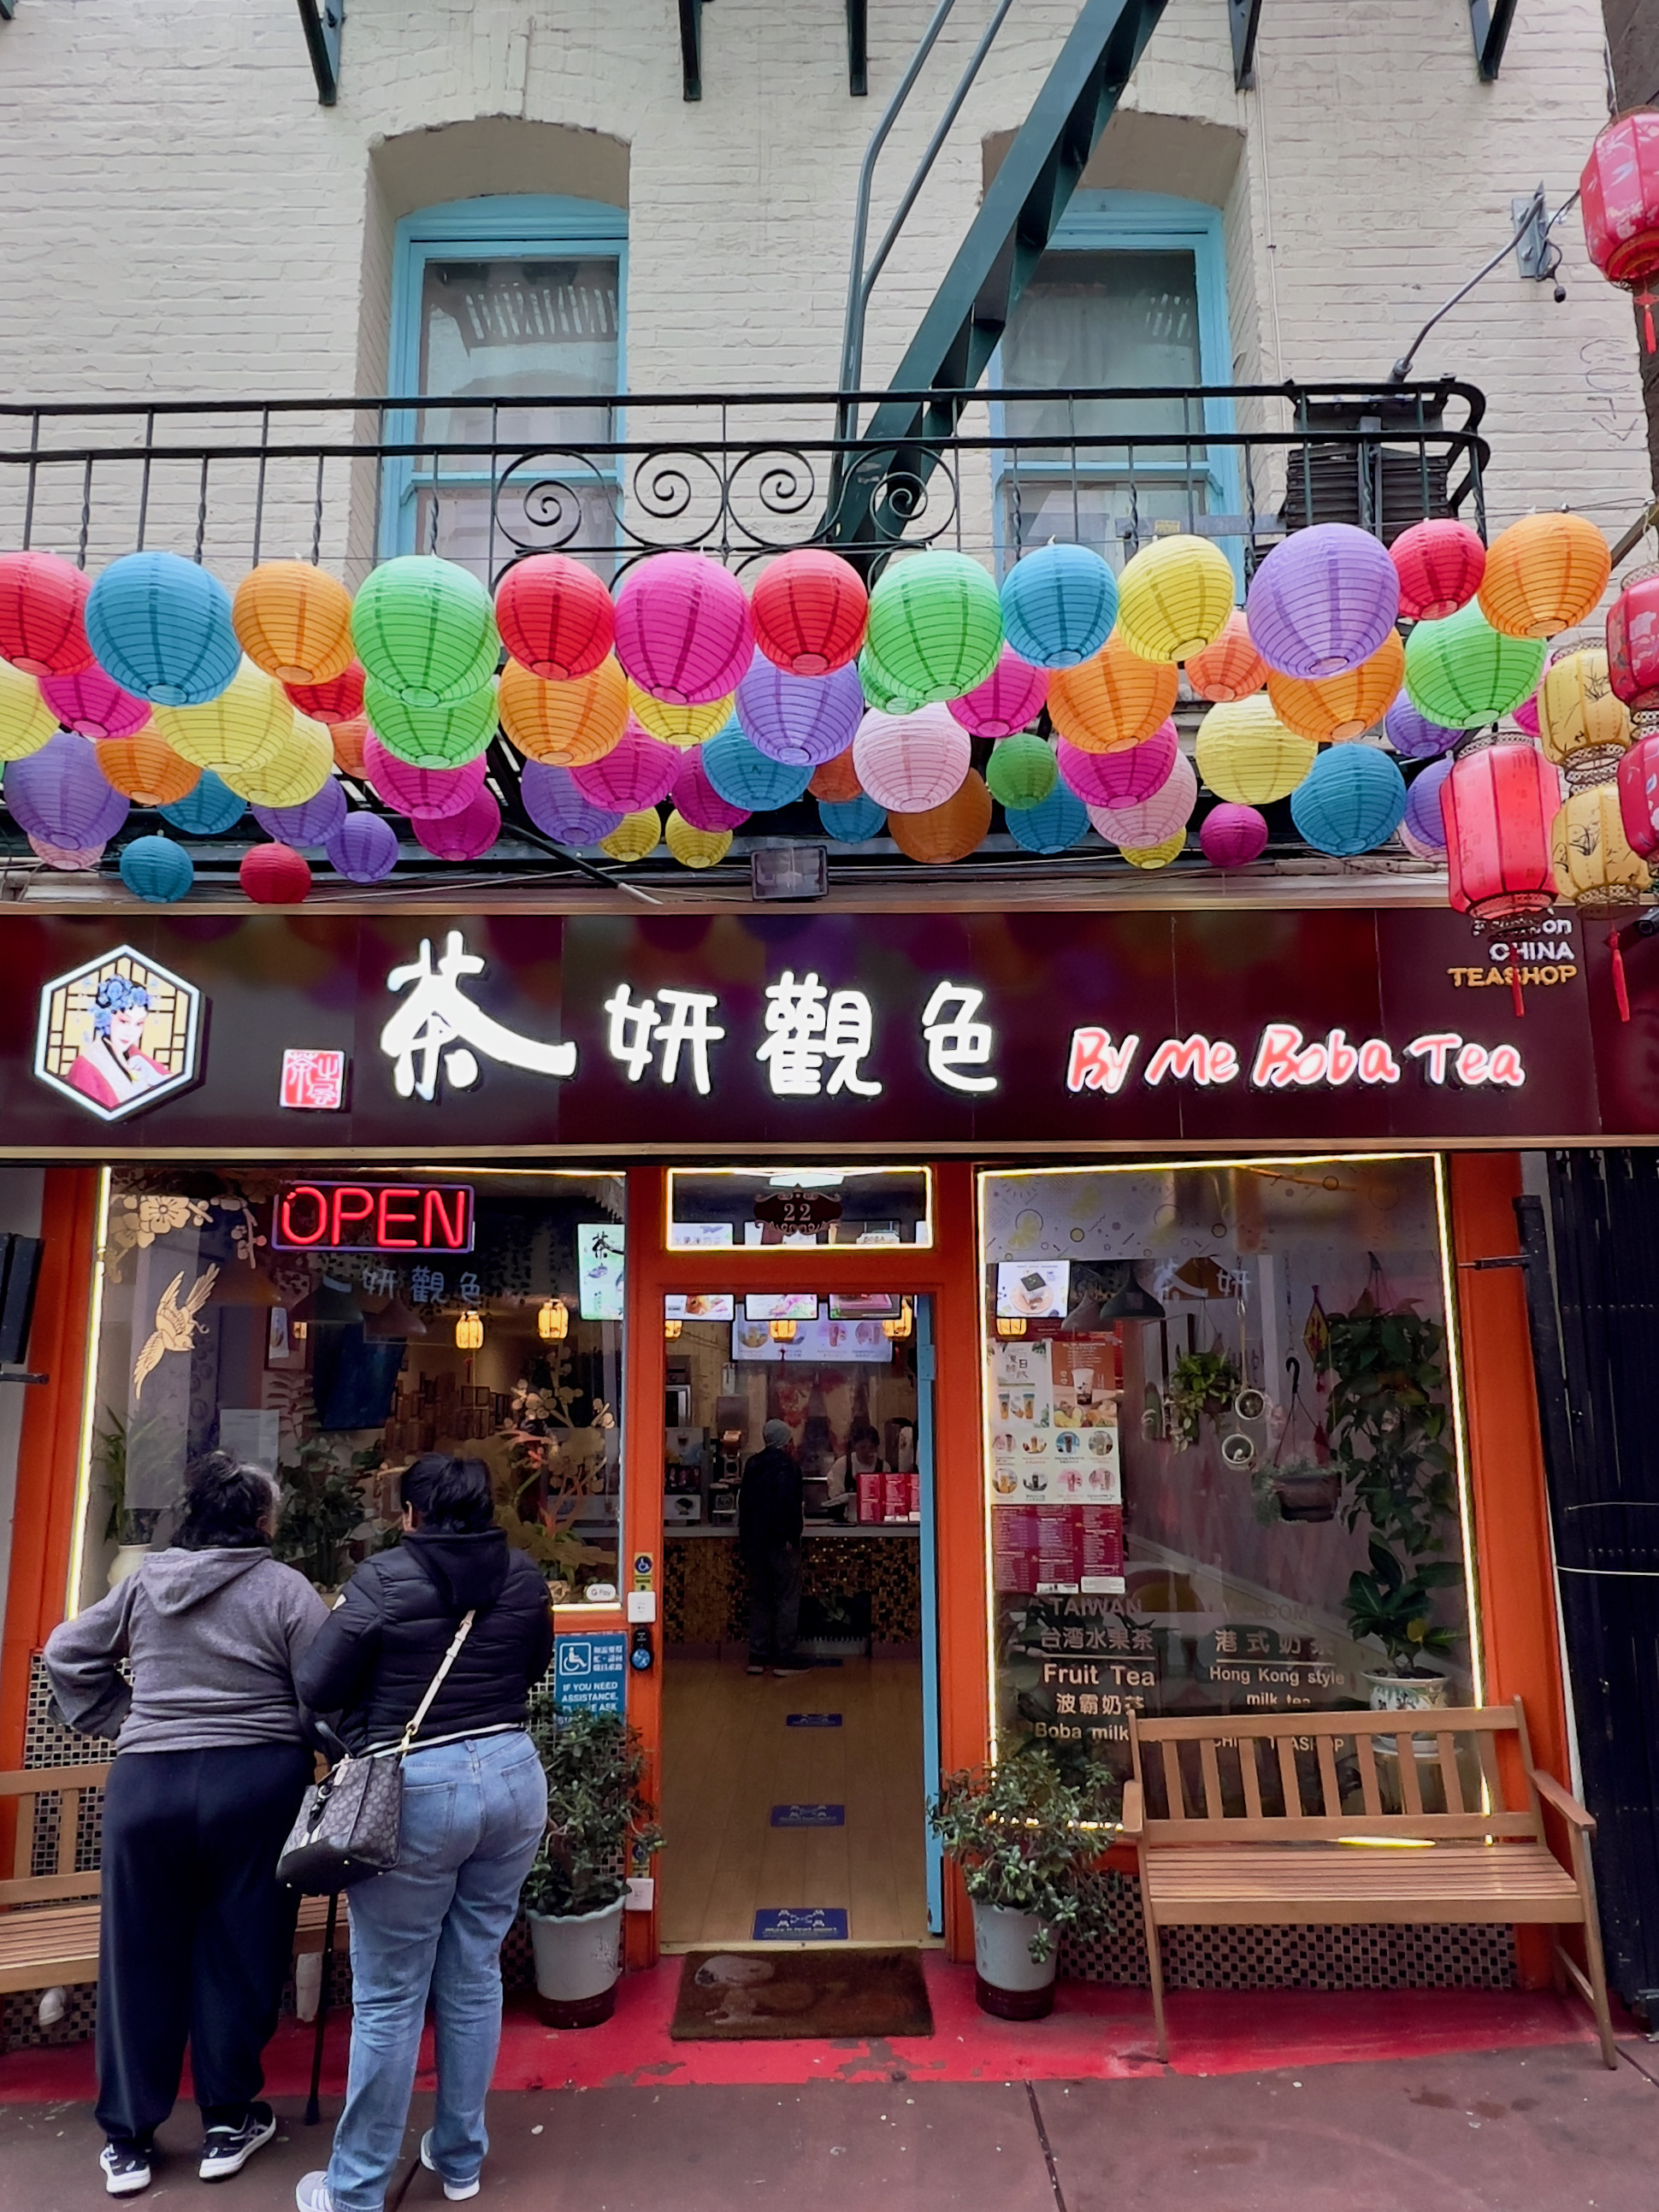 While still retaining many traditional stores, from souvenir shops to herbalists, San Francisco’s Chinatown is not slow to follow recent trends, such as the liking for bubble tea. Photo: Peter Neville-Hadley